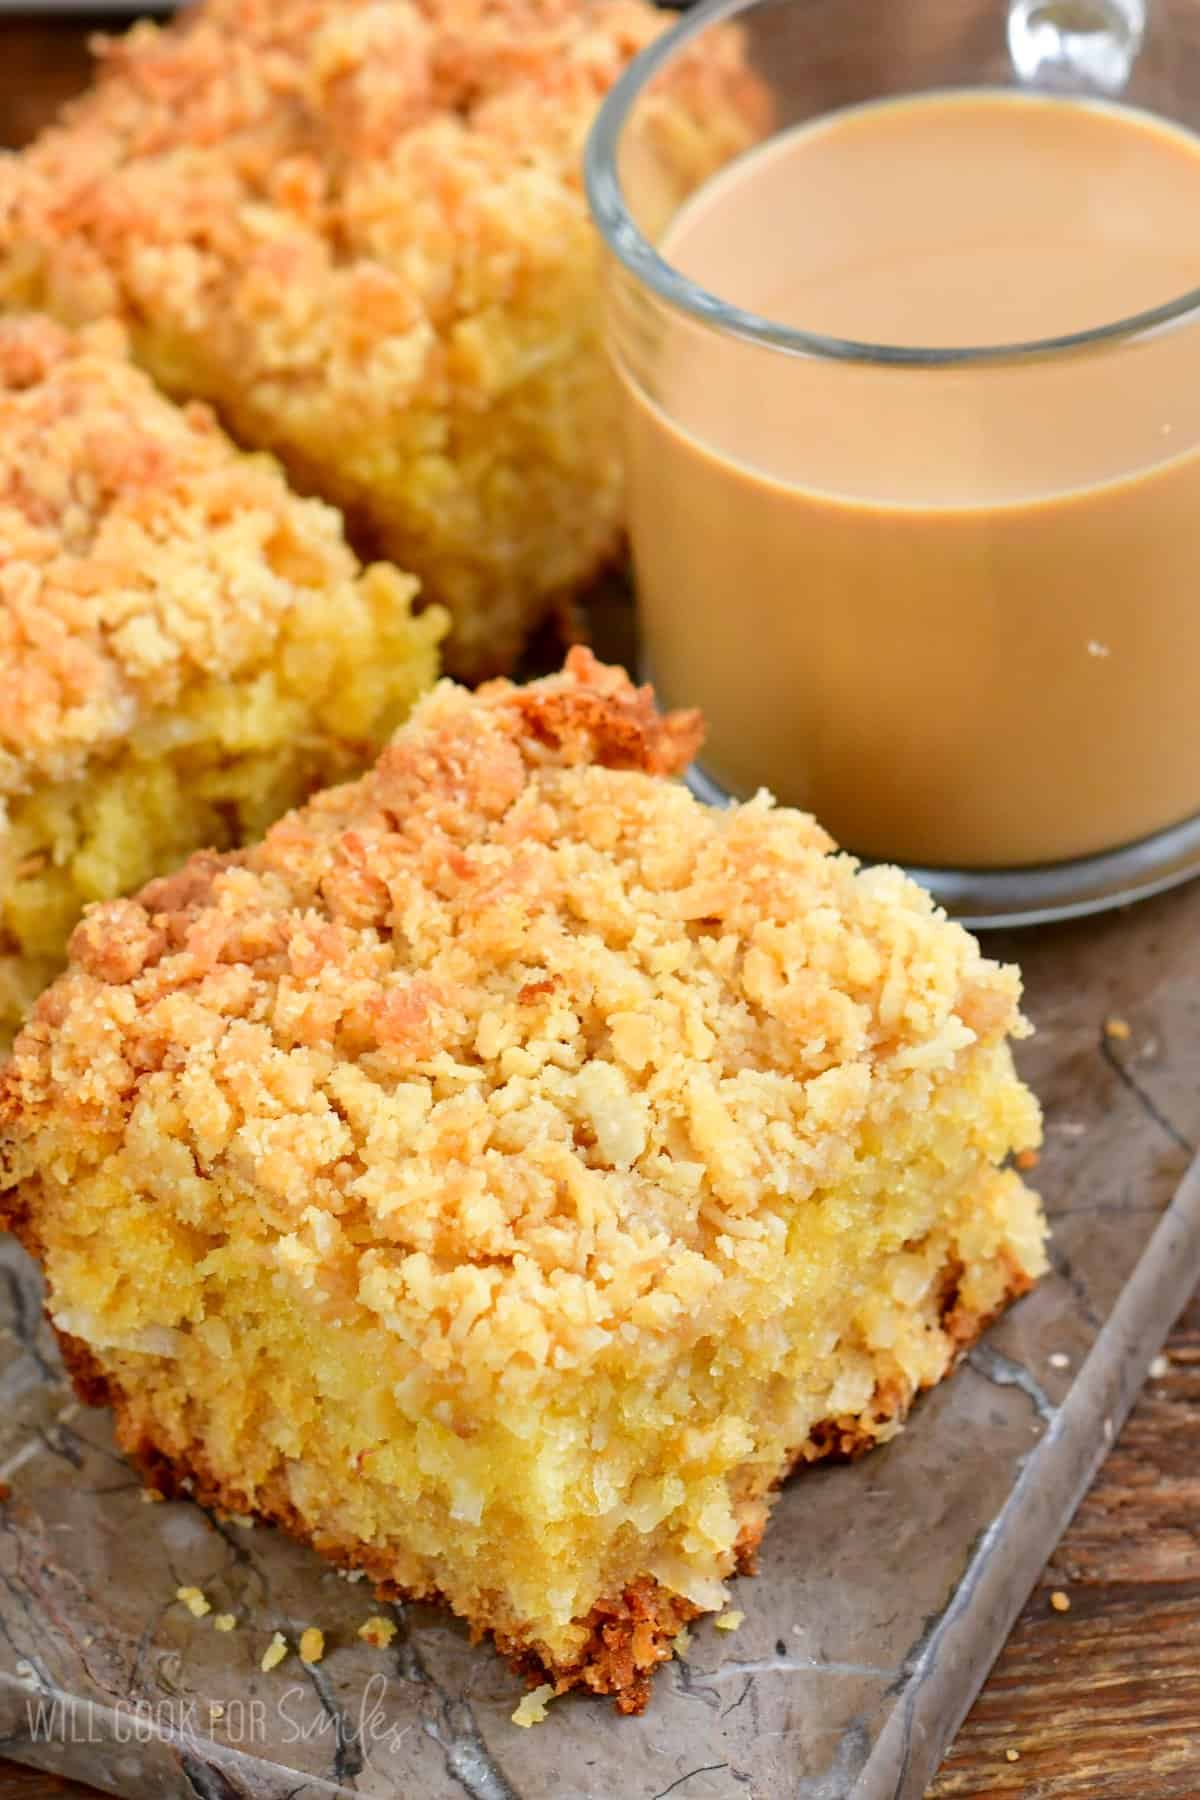 three slices of coconut coffee cake with a glass mug of coffee next to them.